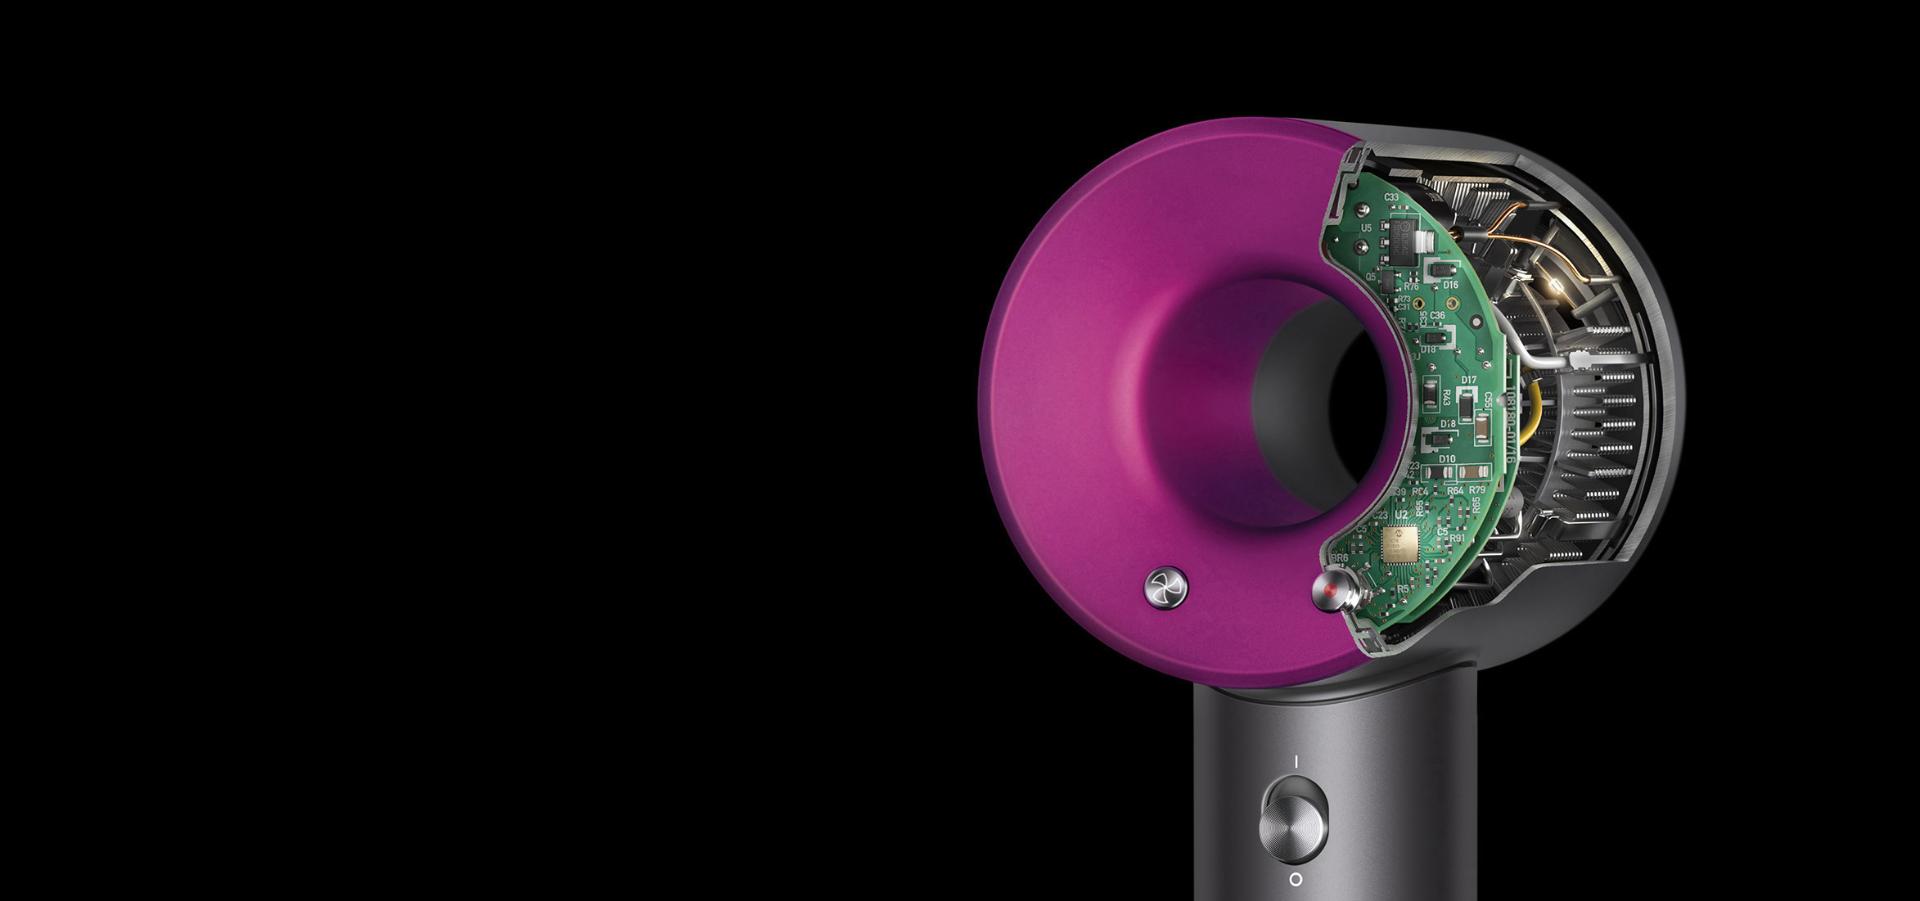 Cutaway inside the Dyson Supersonic hair dryer and intelligent heat control